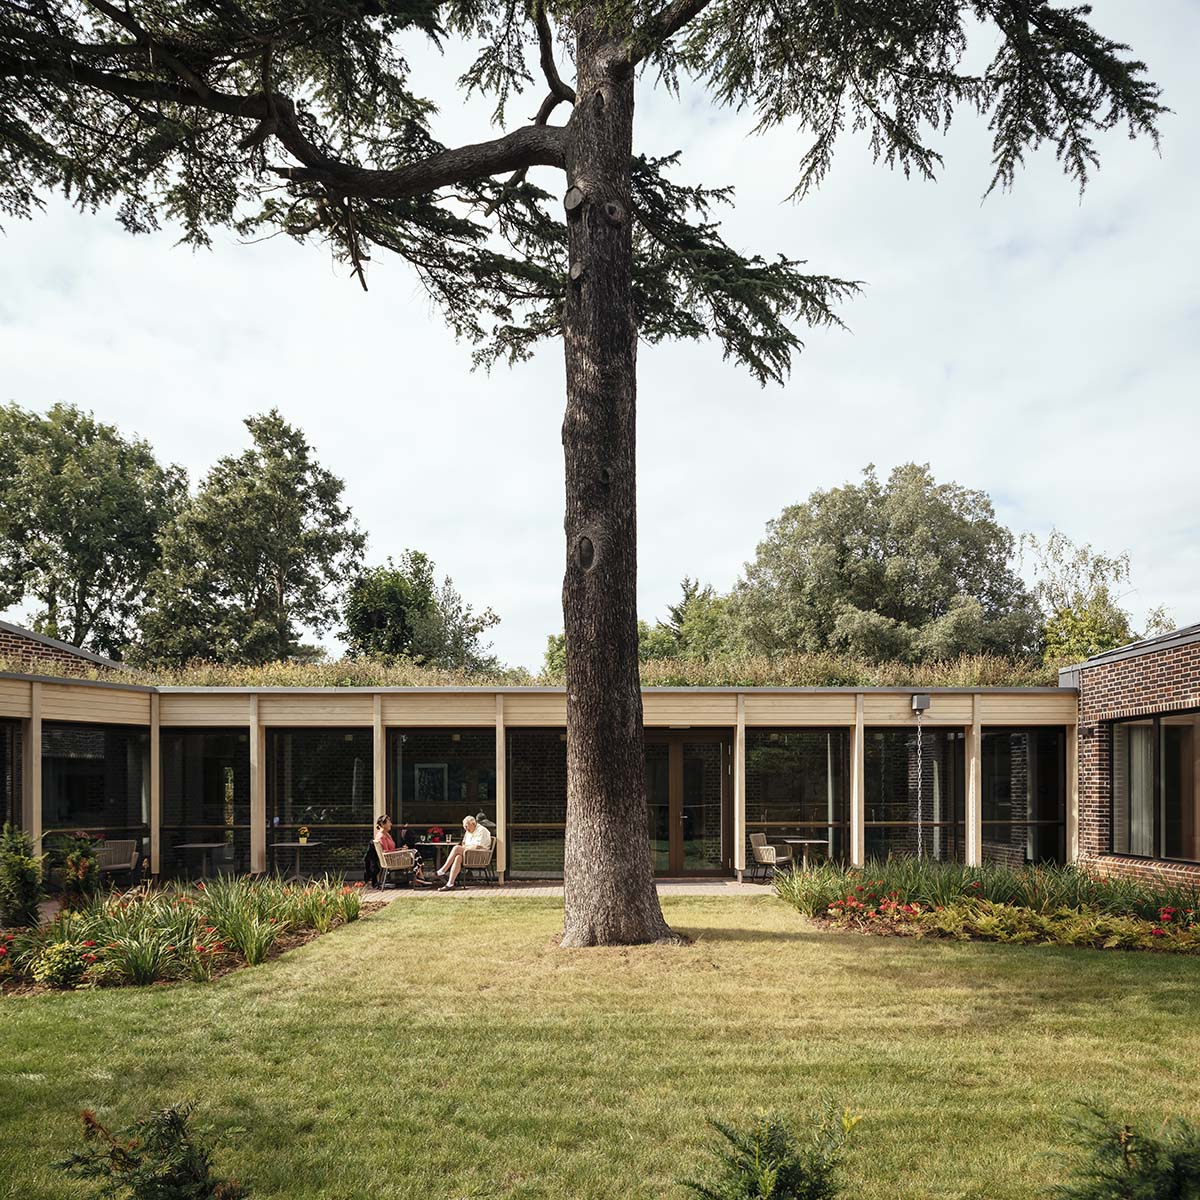 RIBA announces six shortlisted projects for Stirling Prize 2023